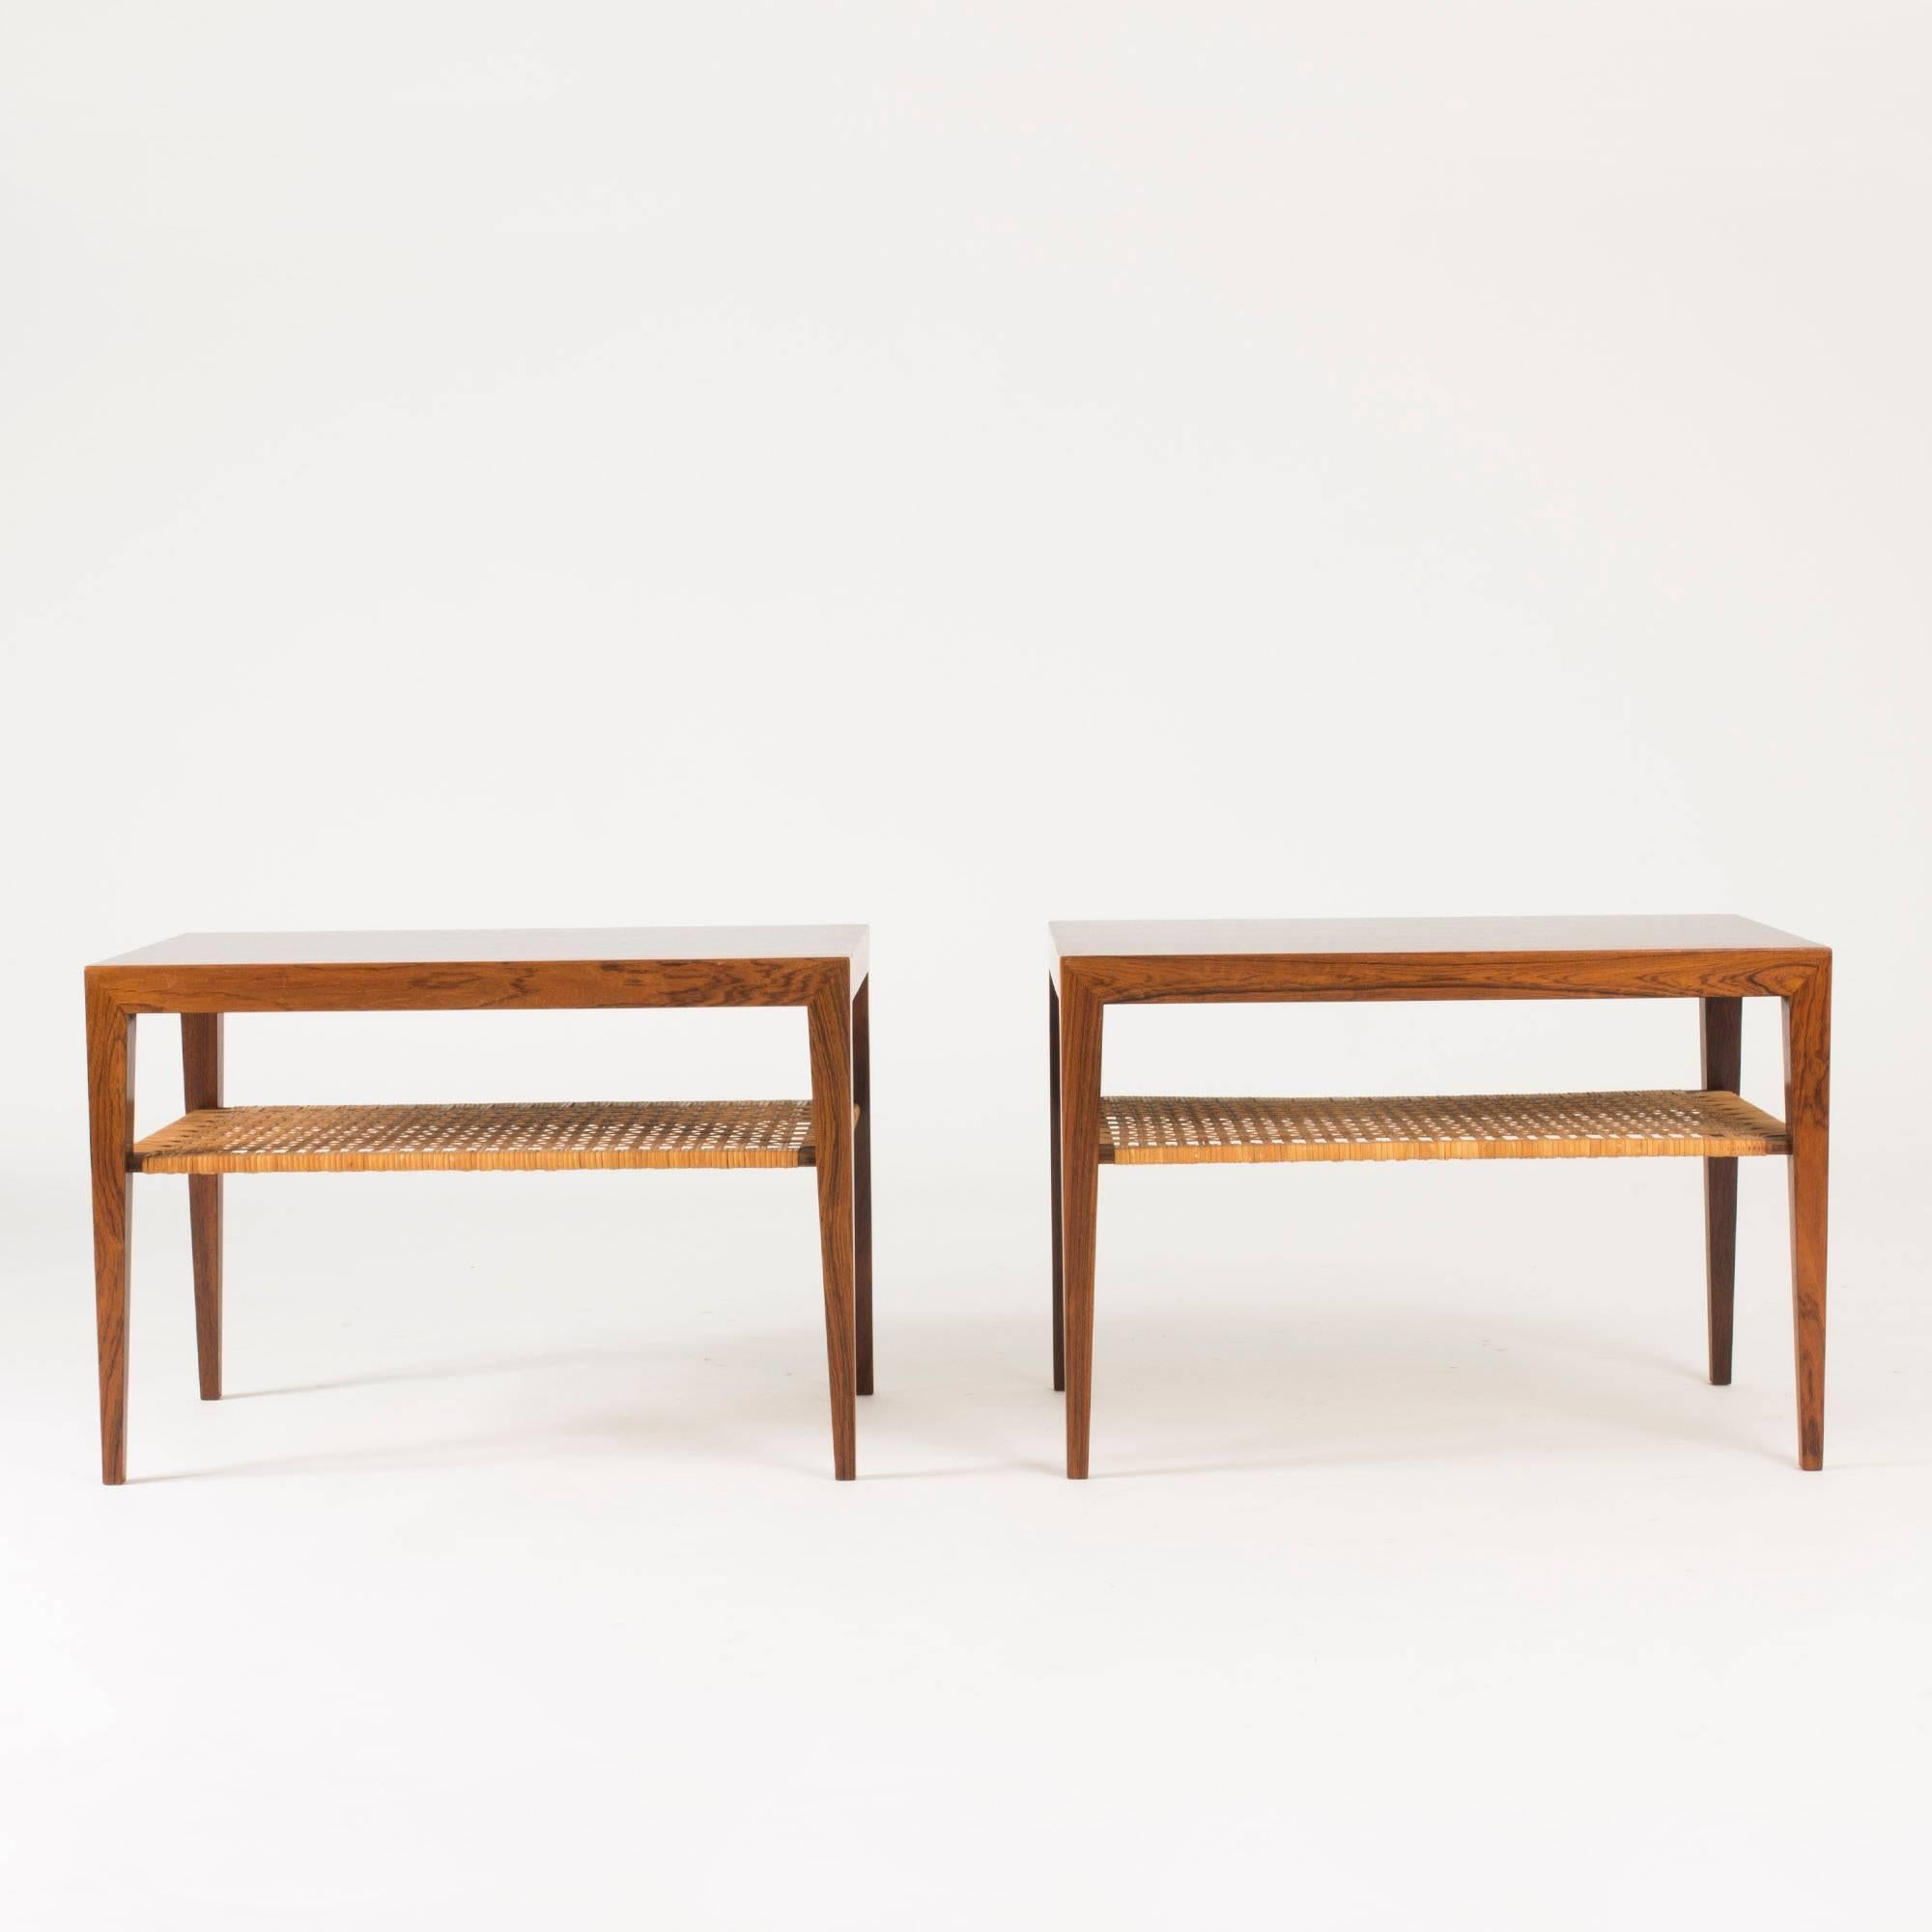 Pair of amazing rosewood side tables by Severin Hansen, with sharp silhouettes softened by the rattan shelves under the table tops. Beautiful wood grain.